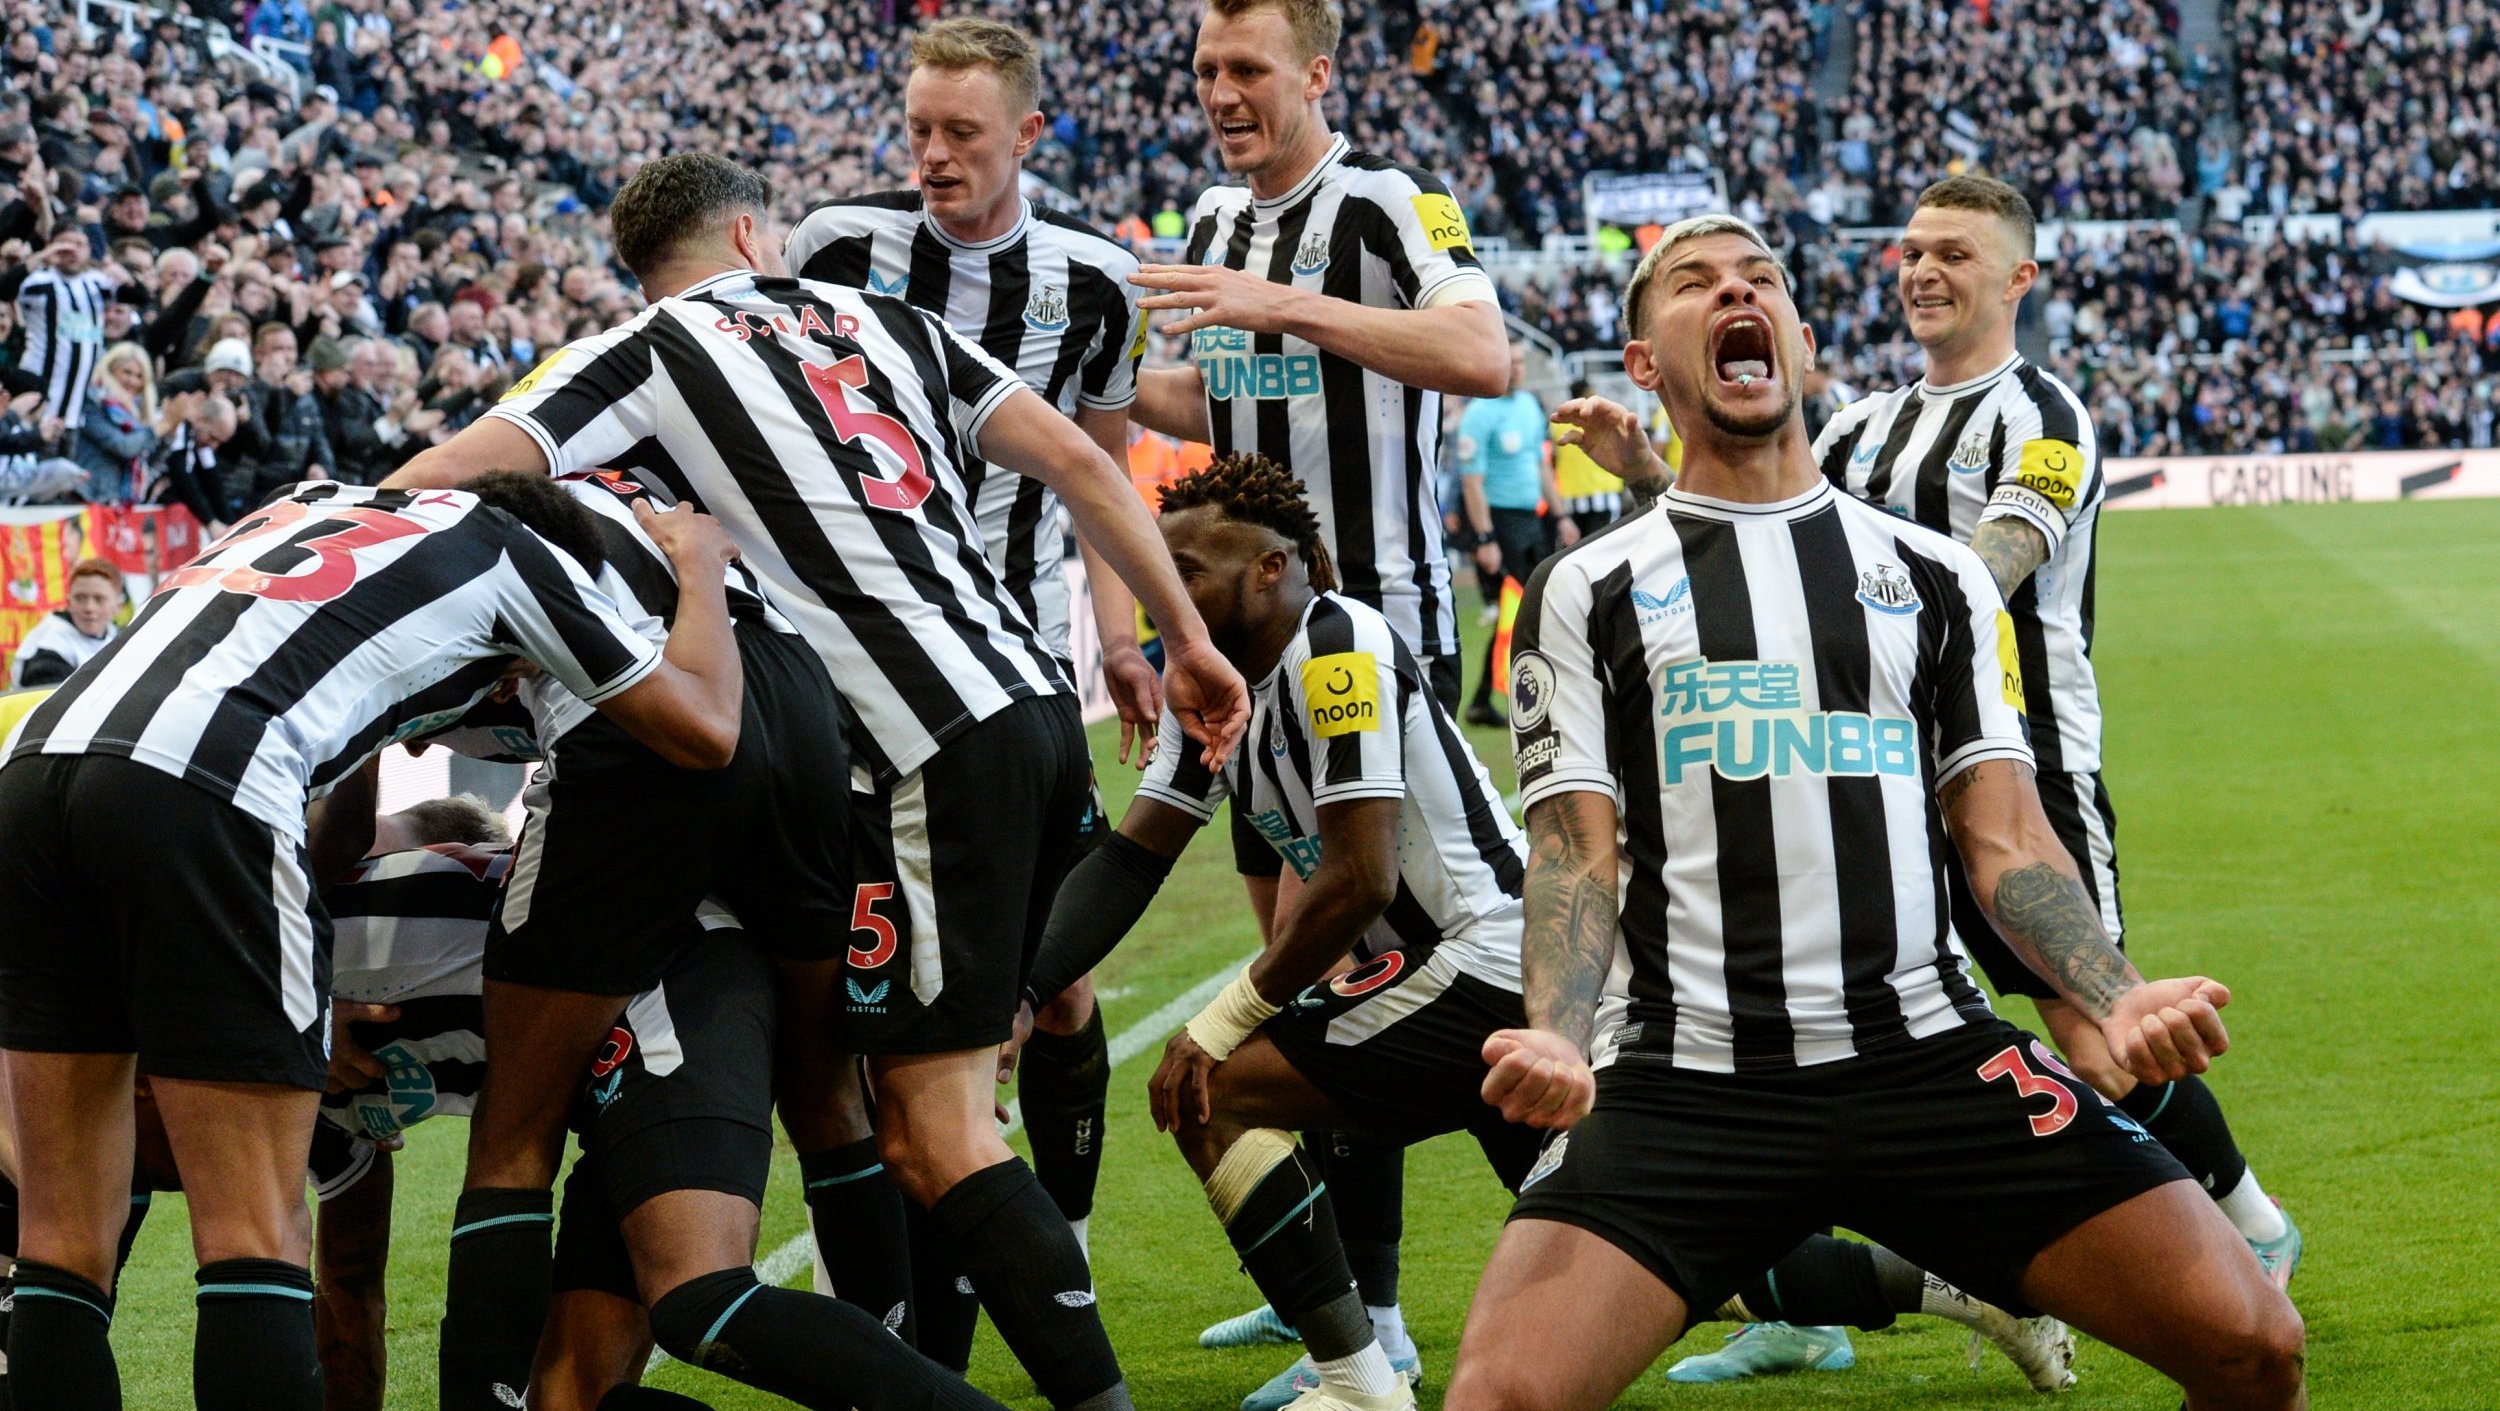 Newcastle revel in the chaos after making a 'mess' of Man Utd